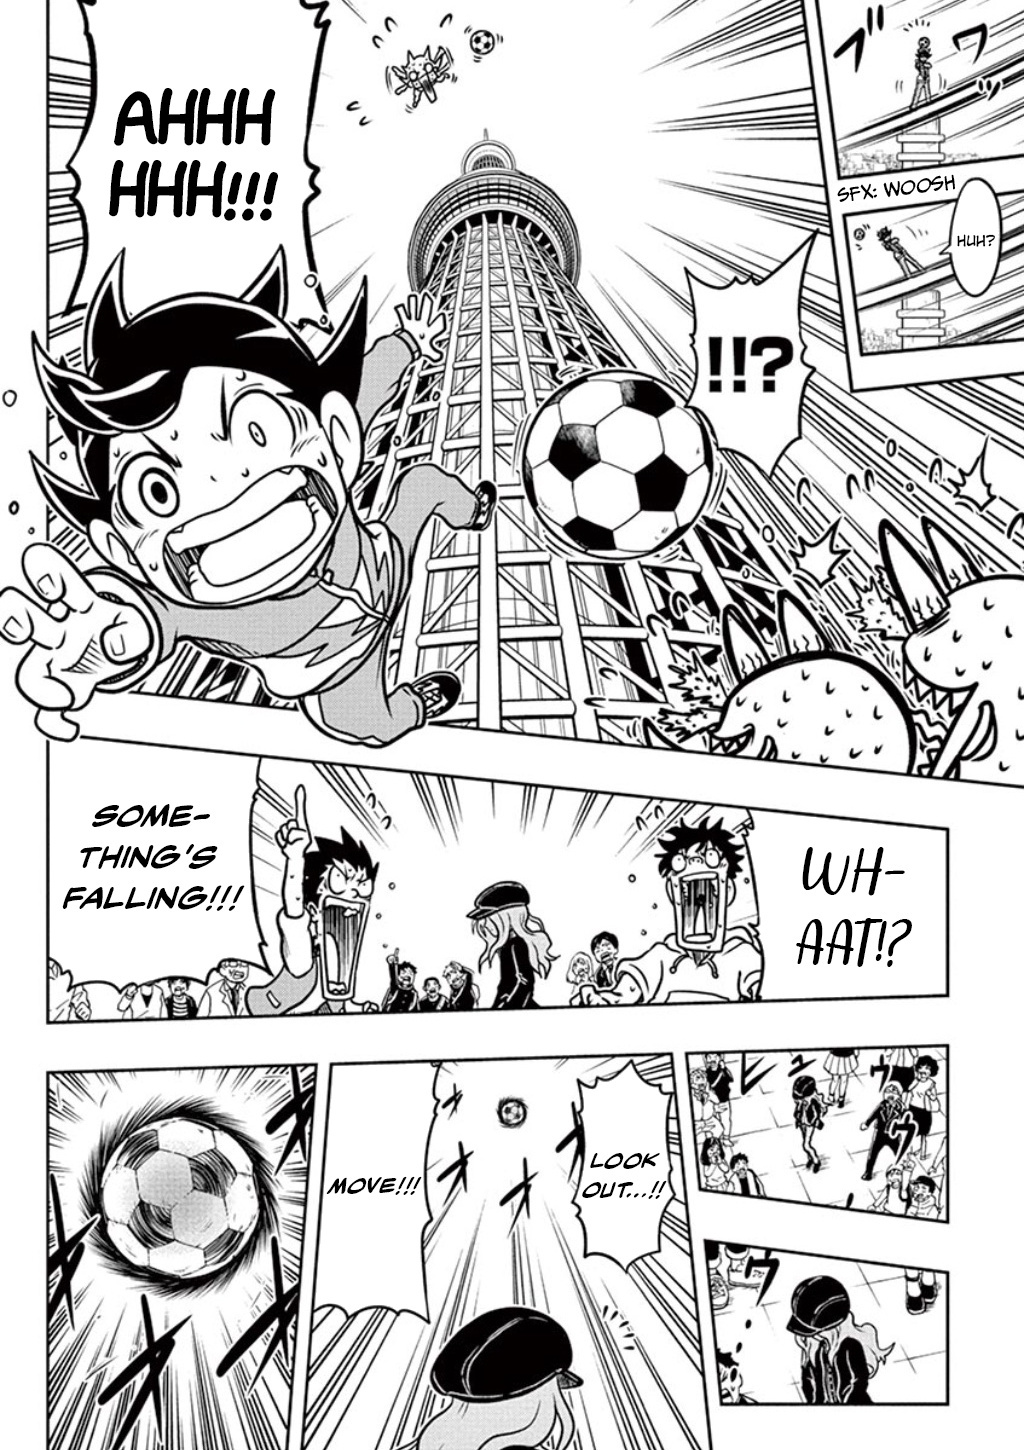 Inazuma Eleven: Ares No Tenbin Vol.1 Chapter 1: The Raimon Soccer Club Faces A Threat Of Demise!? - Picture 3